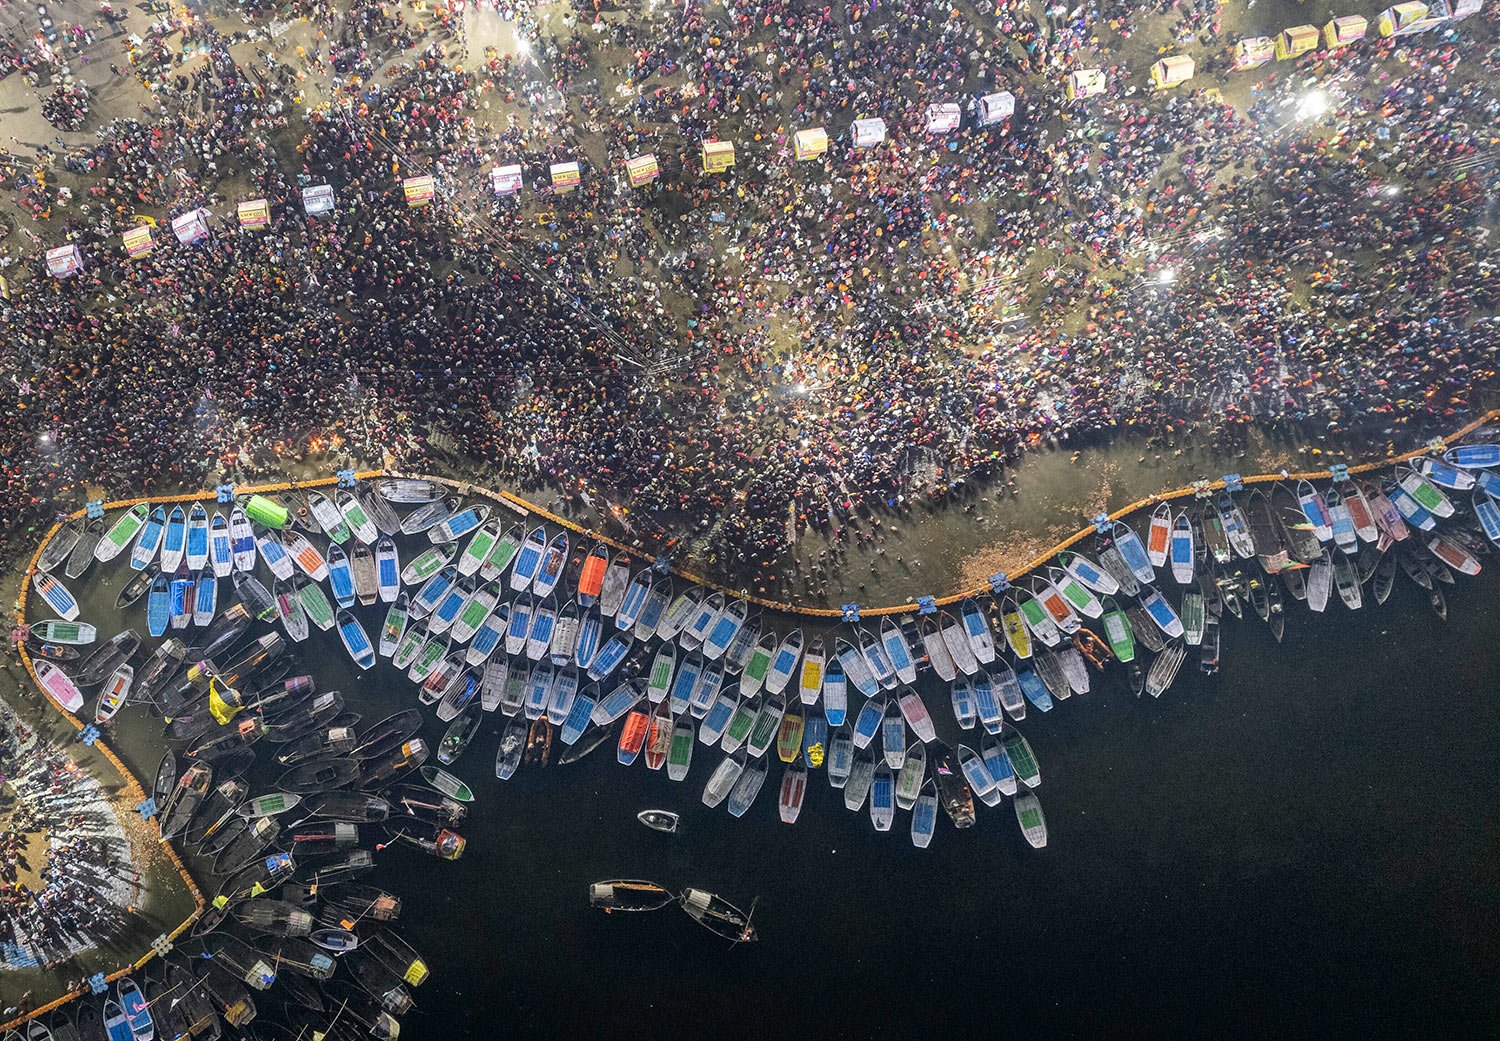  Hindu devotees crowd the Sangam, the confluence of the rivers, the Ganges, Yamuna and the mythical Saraswati, to take a holy dip on Mauni Amavasya, or the new moon day which is the most auspicious day during the annual month long Hindu religious fai